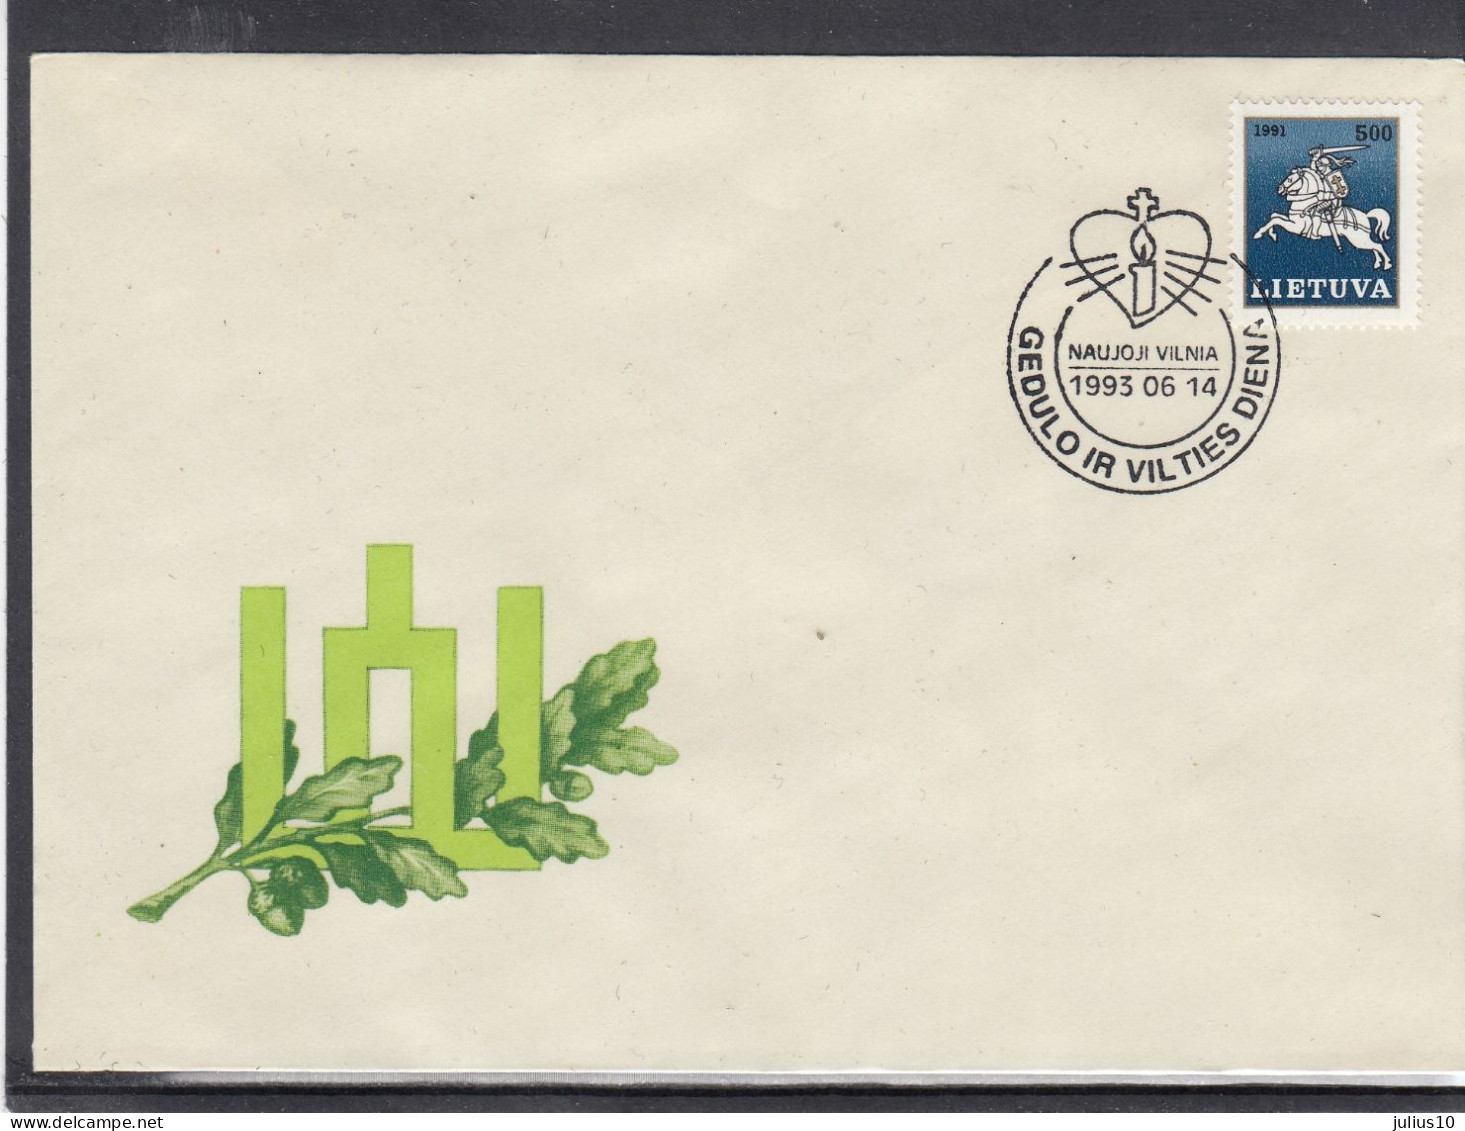 LITHUANIA 1993 Cover Special Cancel Mourning Day #LTV226 - Lithuania